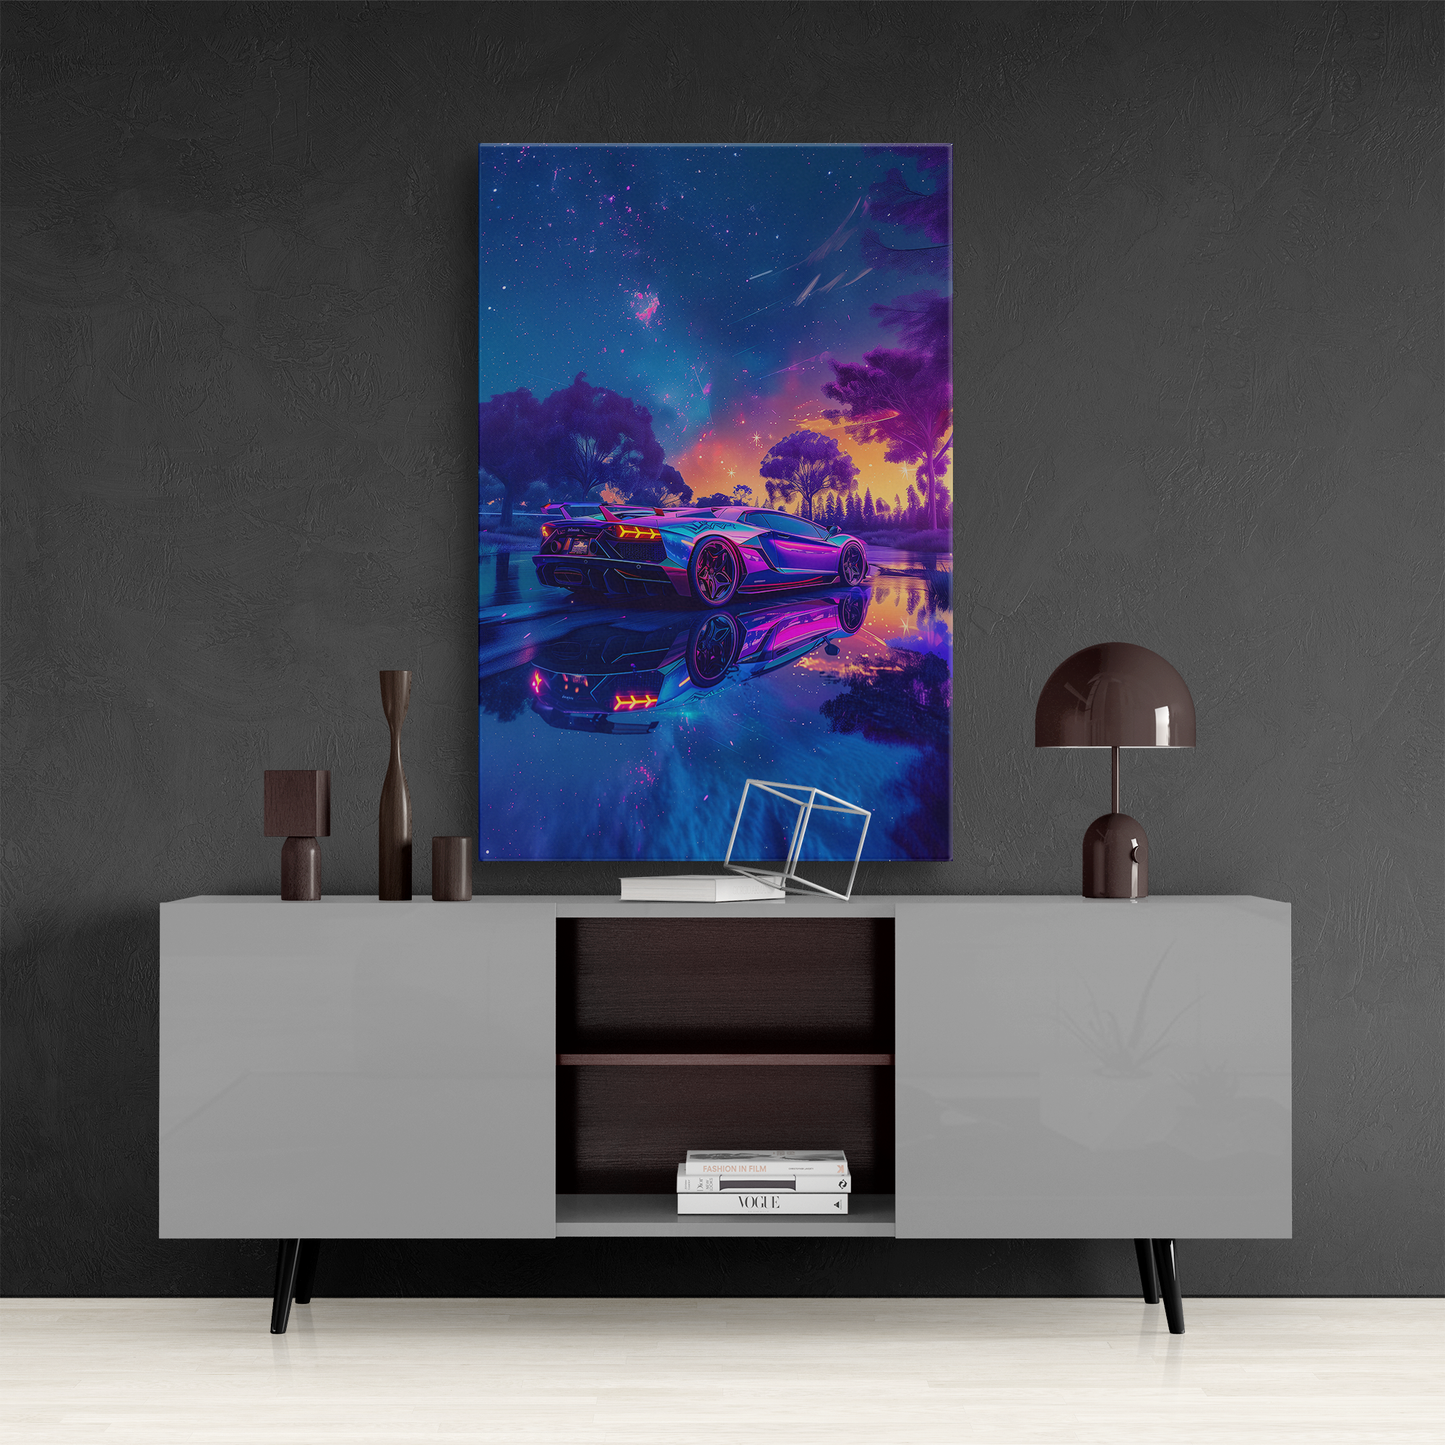 Stellar Sprinter (Canvas)Upgrade your tech with the latest gadgets. Shop now for innovative products designed to enhance your digital lifestyle. Fast shipping!RimaGallery